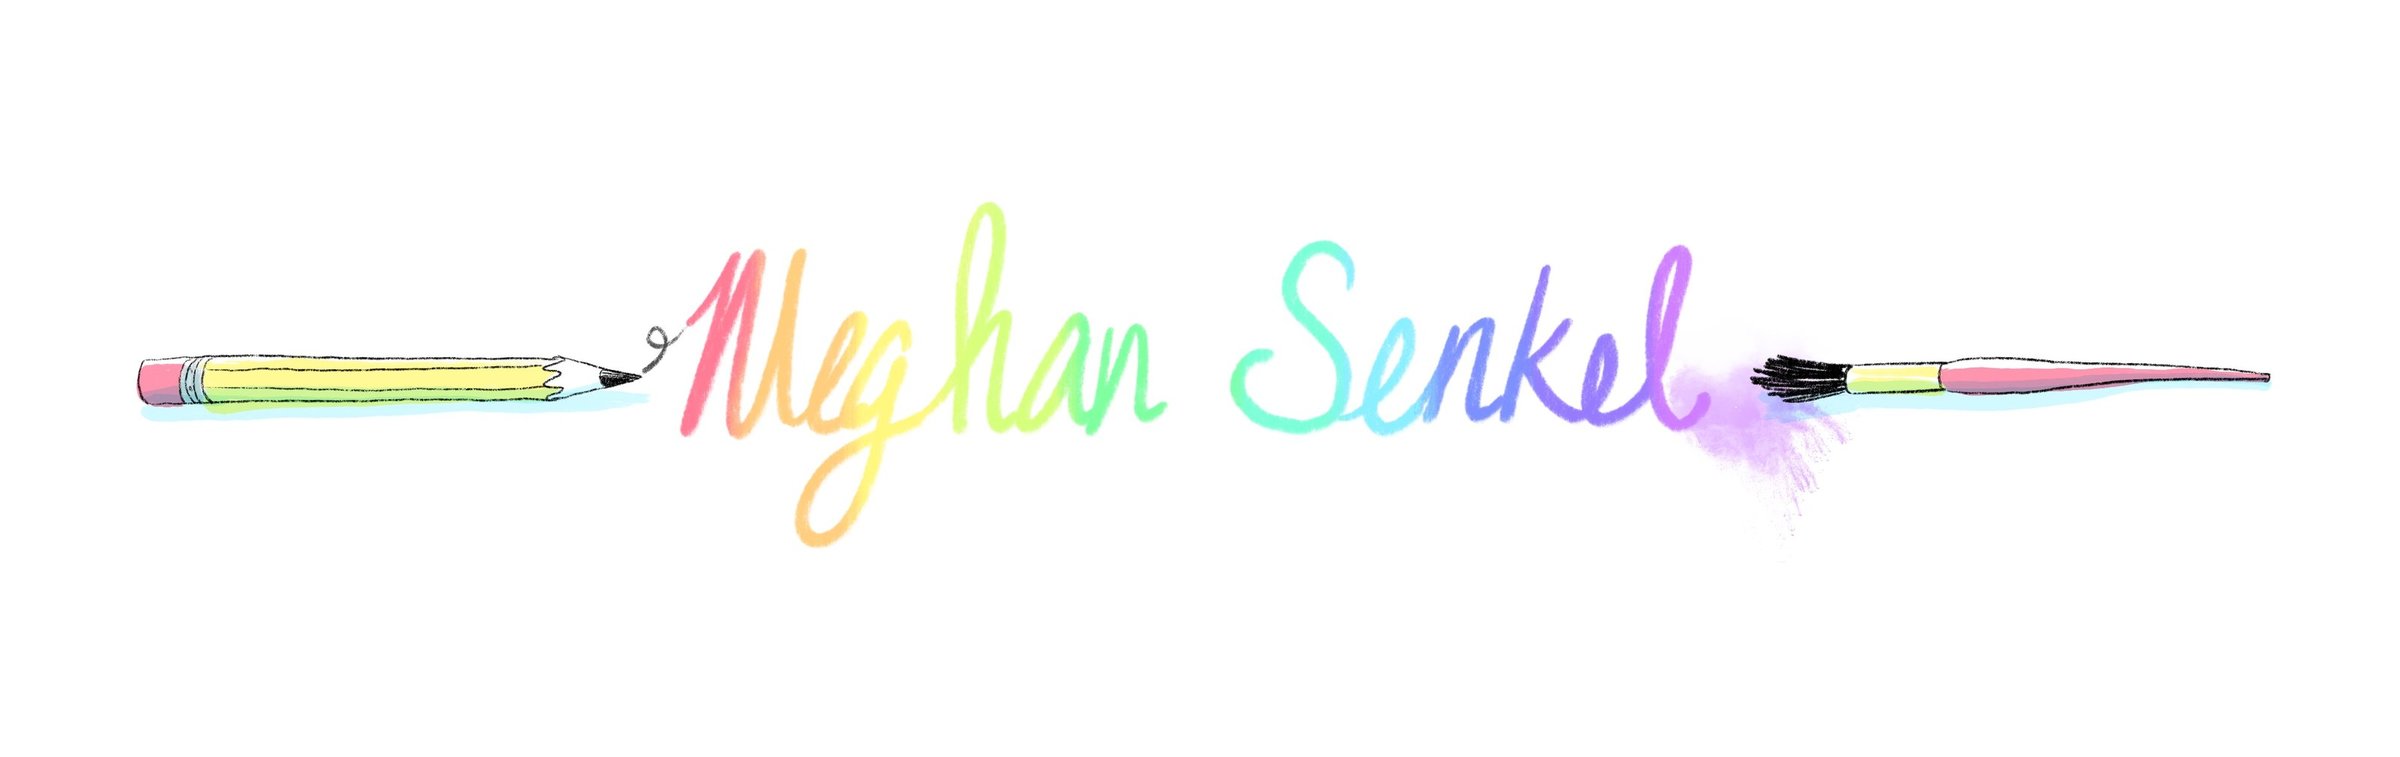 Header image with Meghan Senkel in rainbow script with a pencil and paintbrush